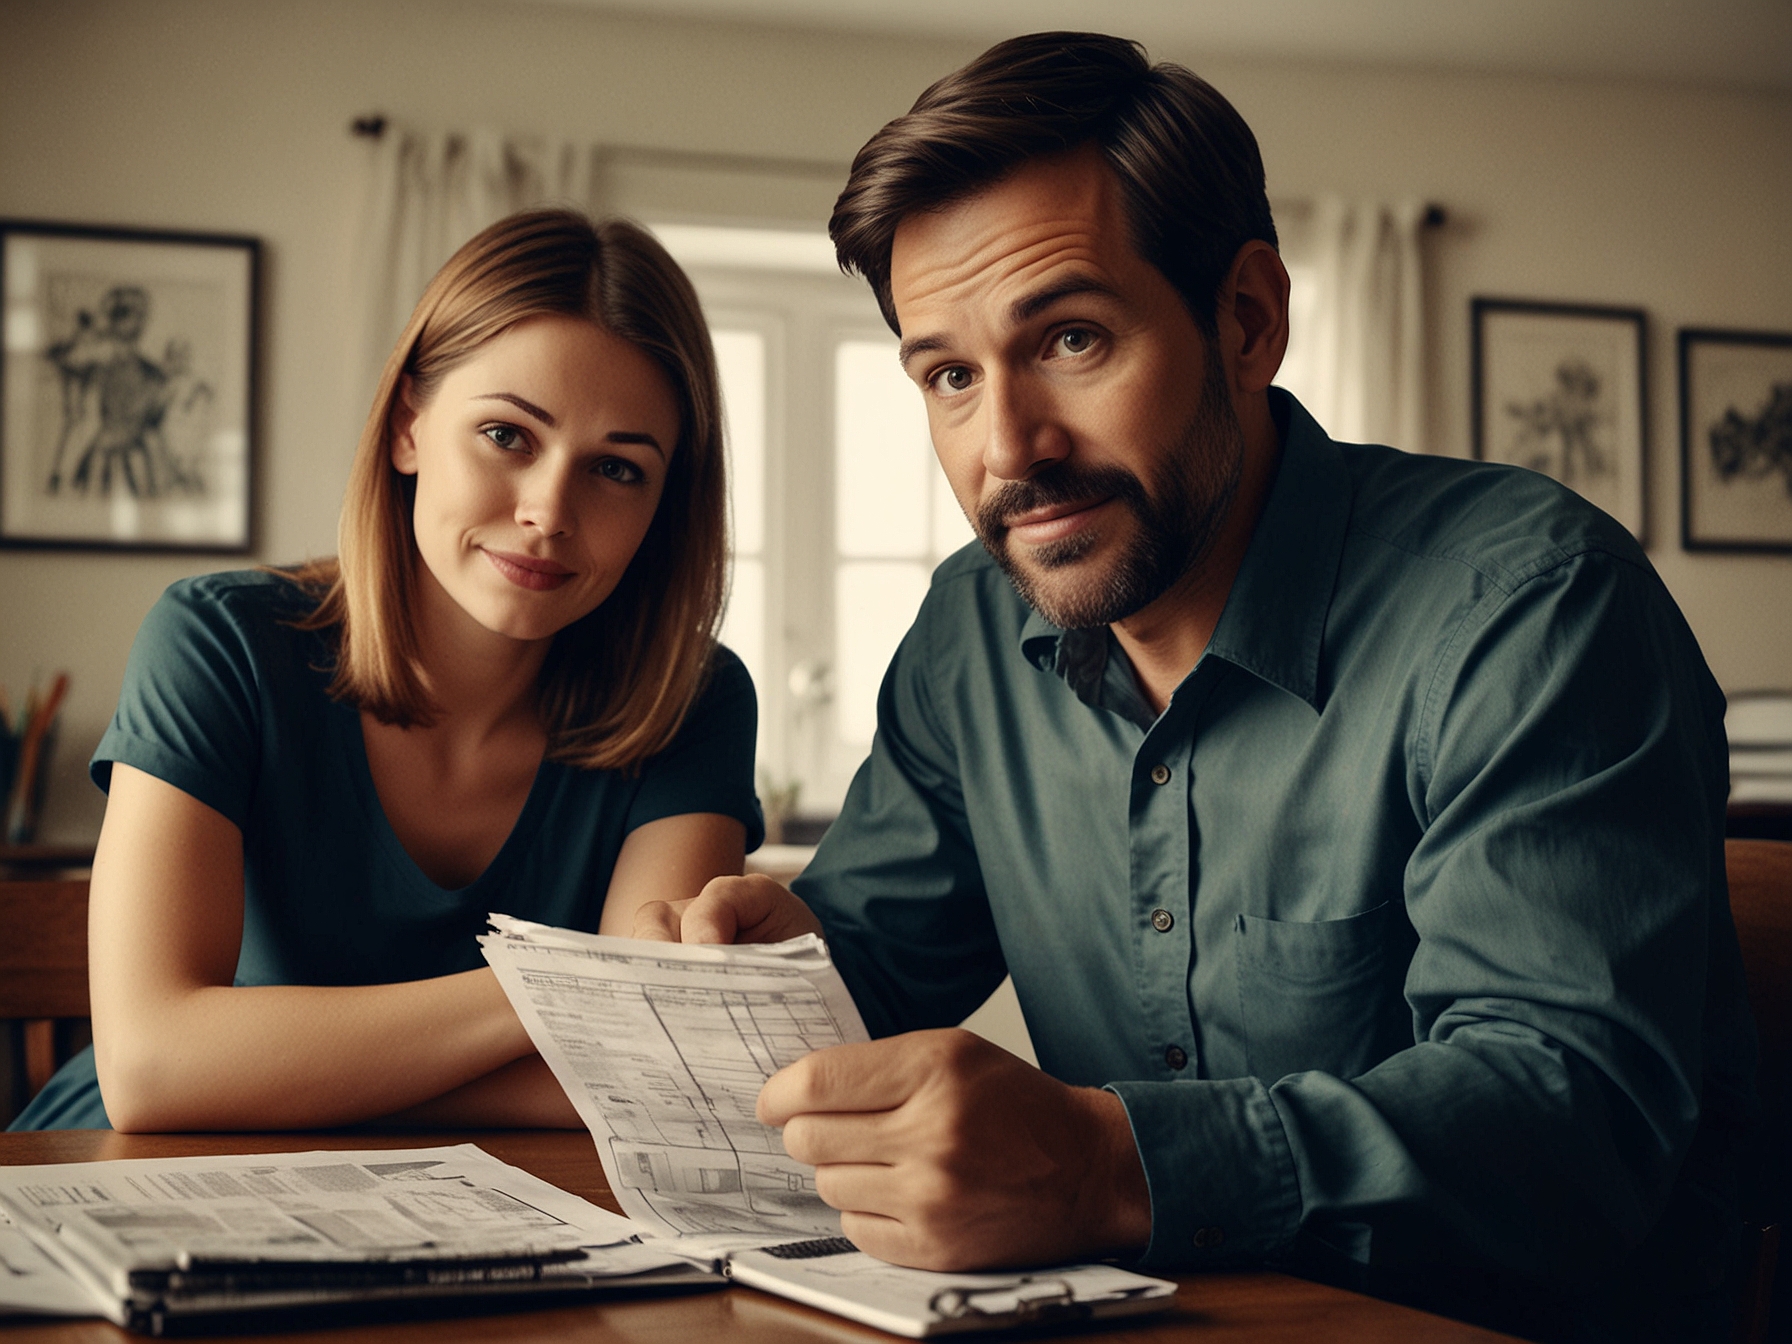 An illustration of a family looking relieved as they review their household budget with a downward trending tax icon, symbolizing the impact of personal tax cuts on disposable income.